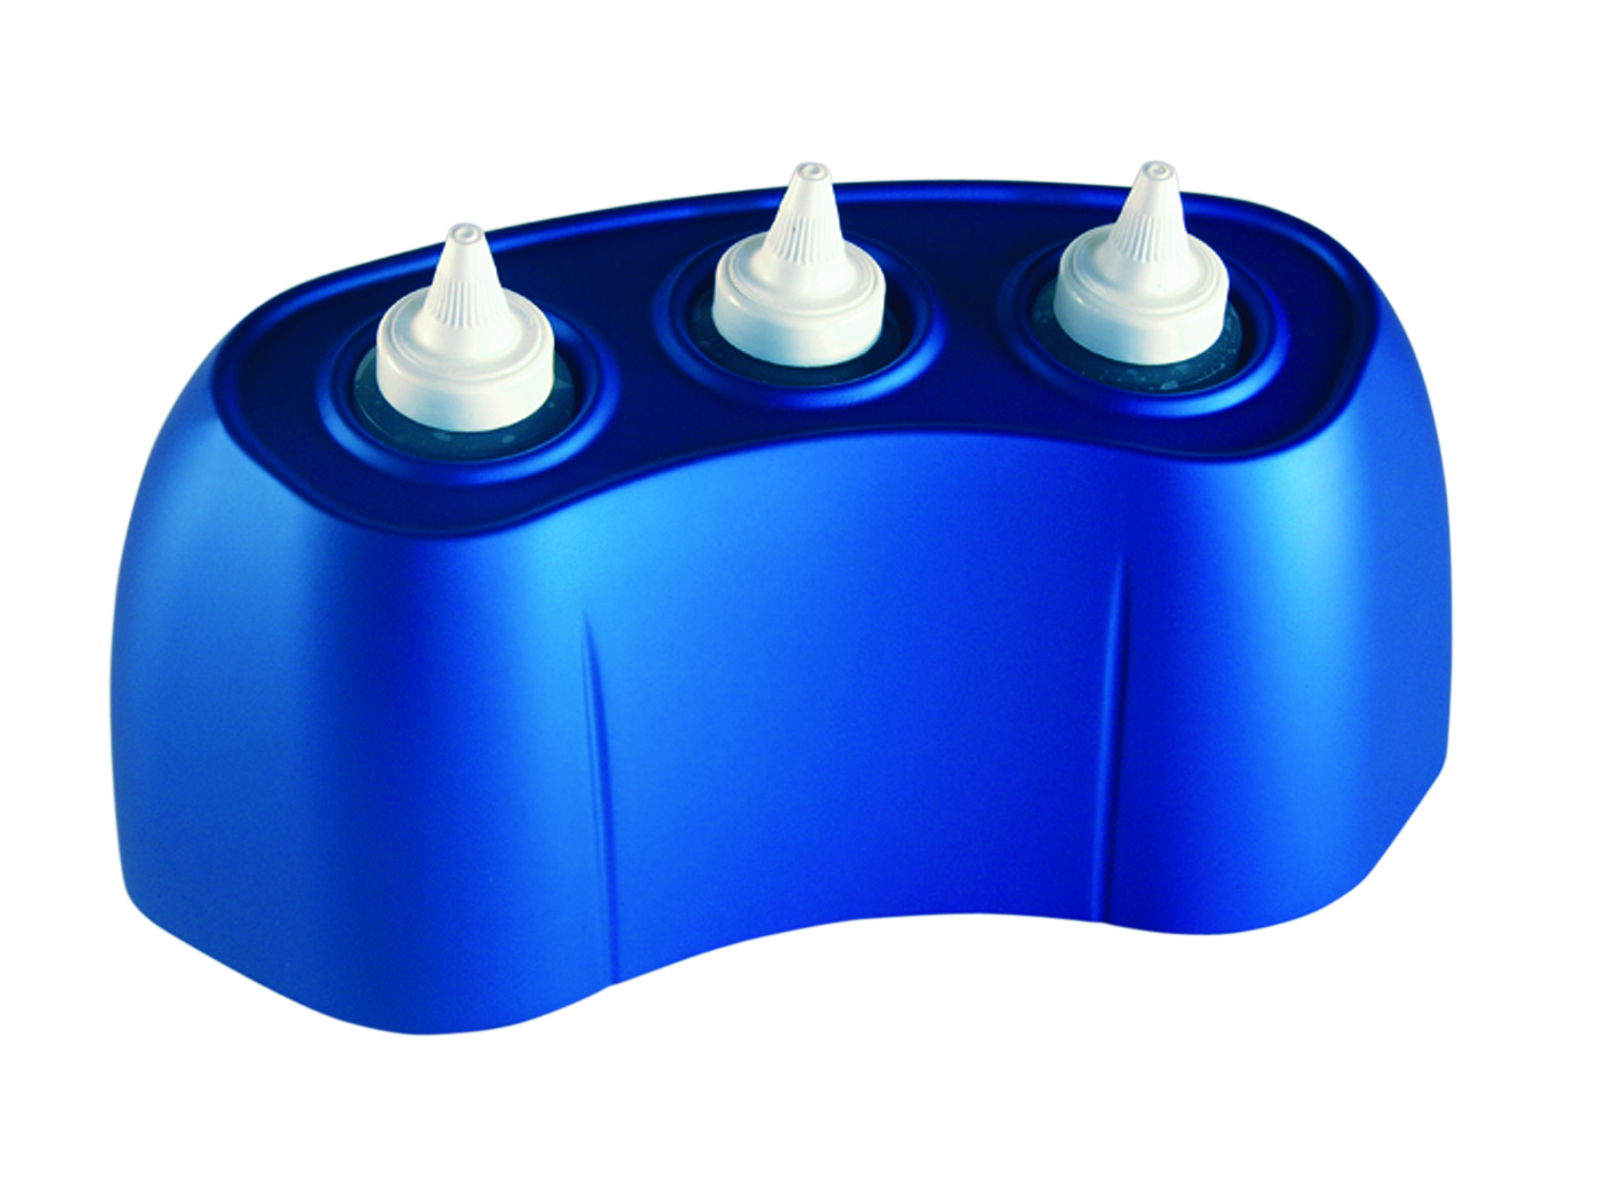 Pure Gel/Lotion Warmers DISCOUNT SALE - Shipping